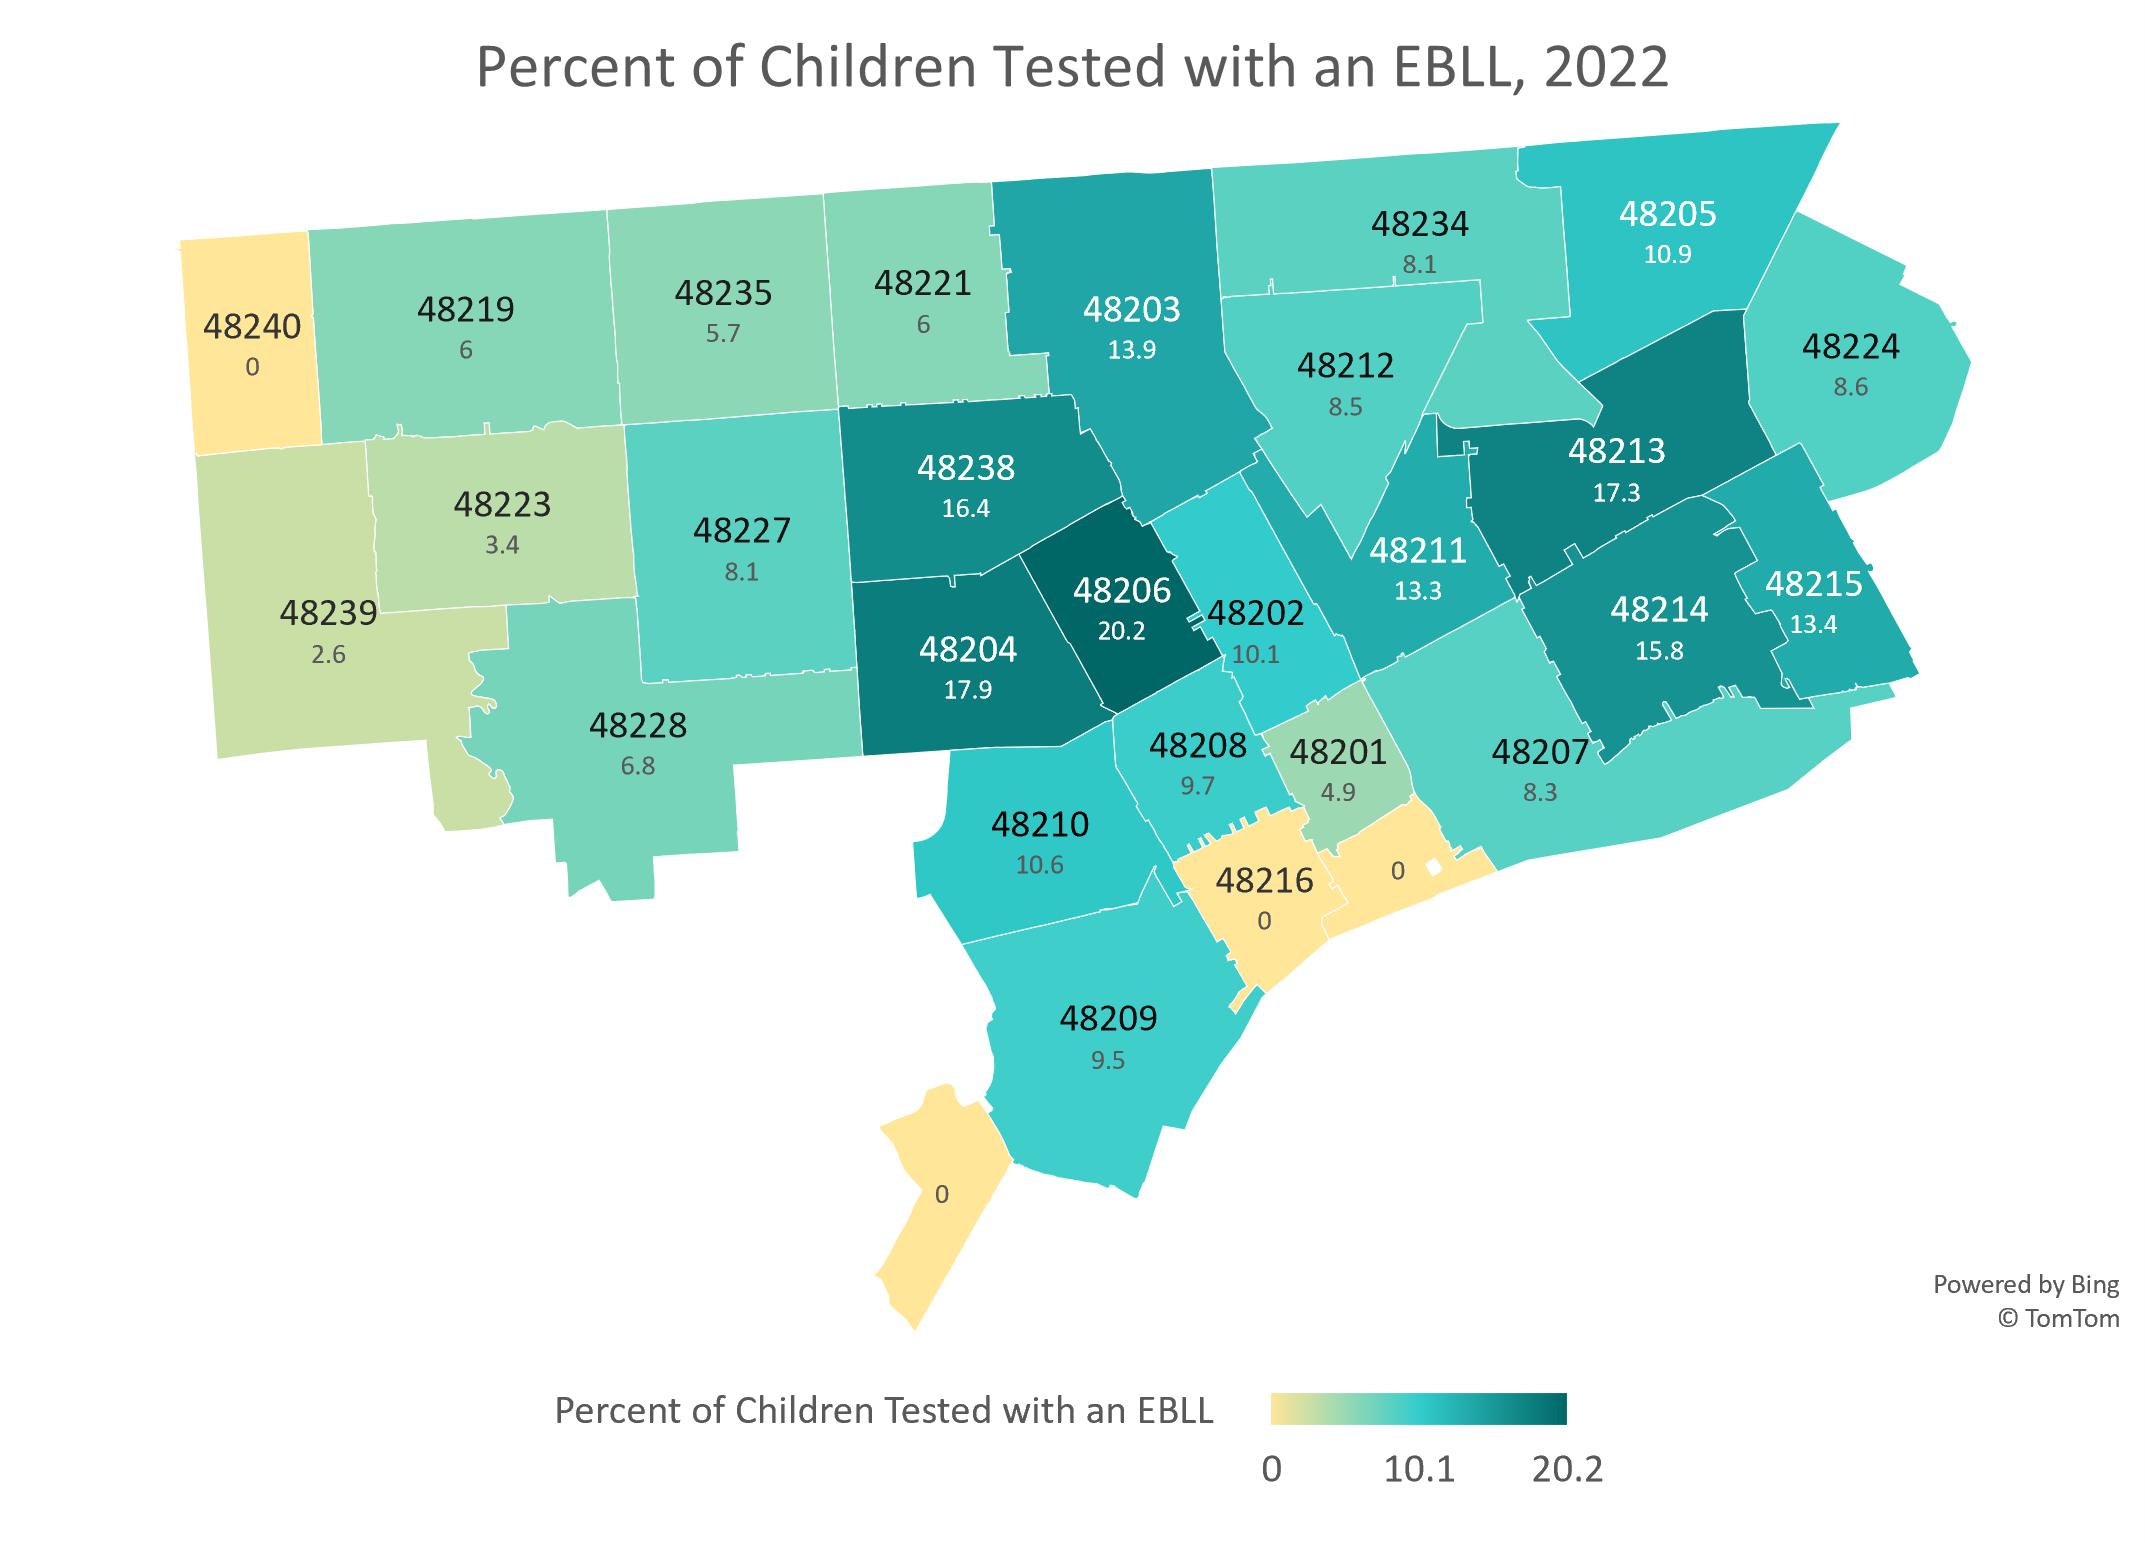 Children tested with an EBLL 2022 map